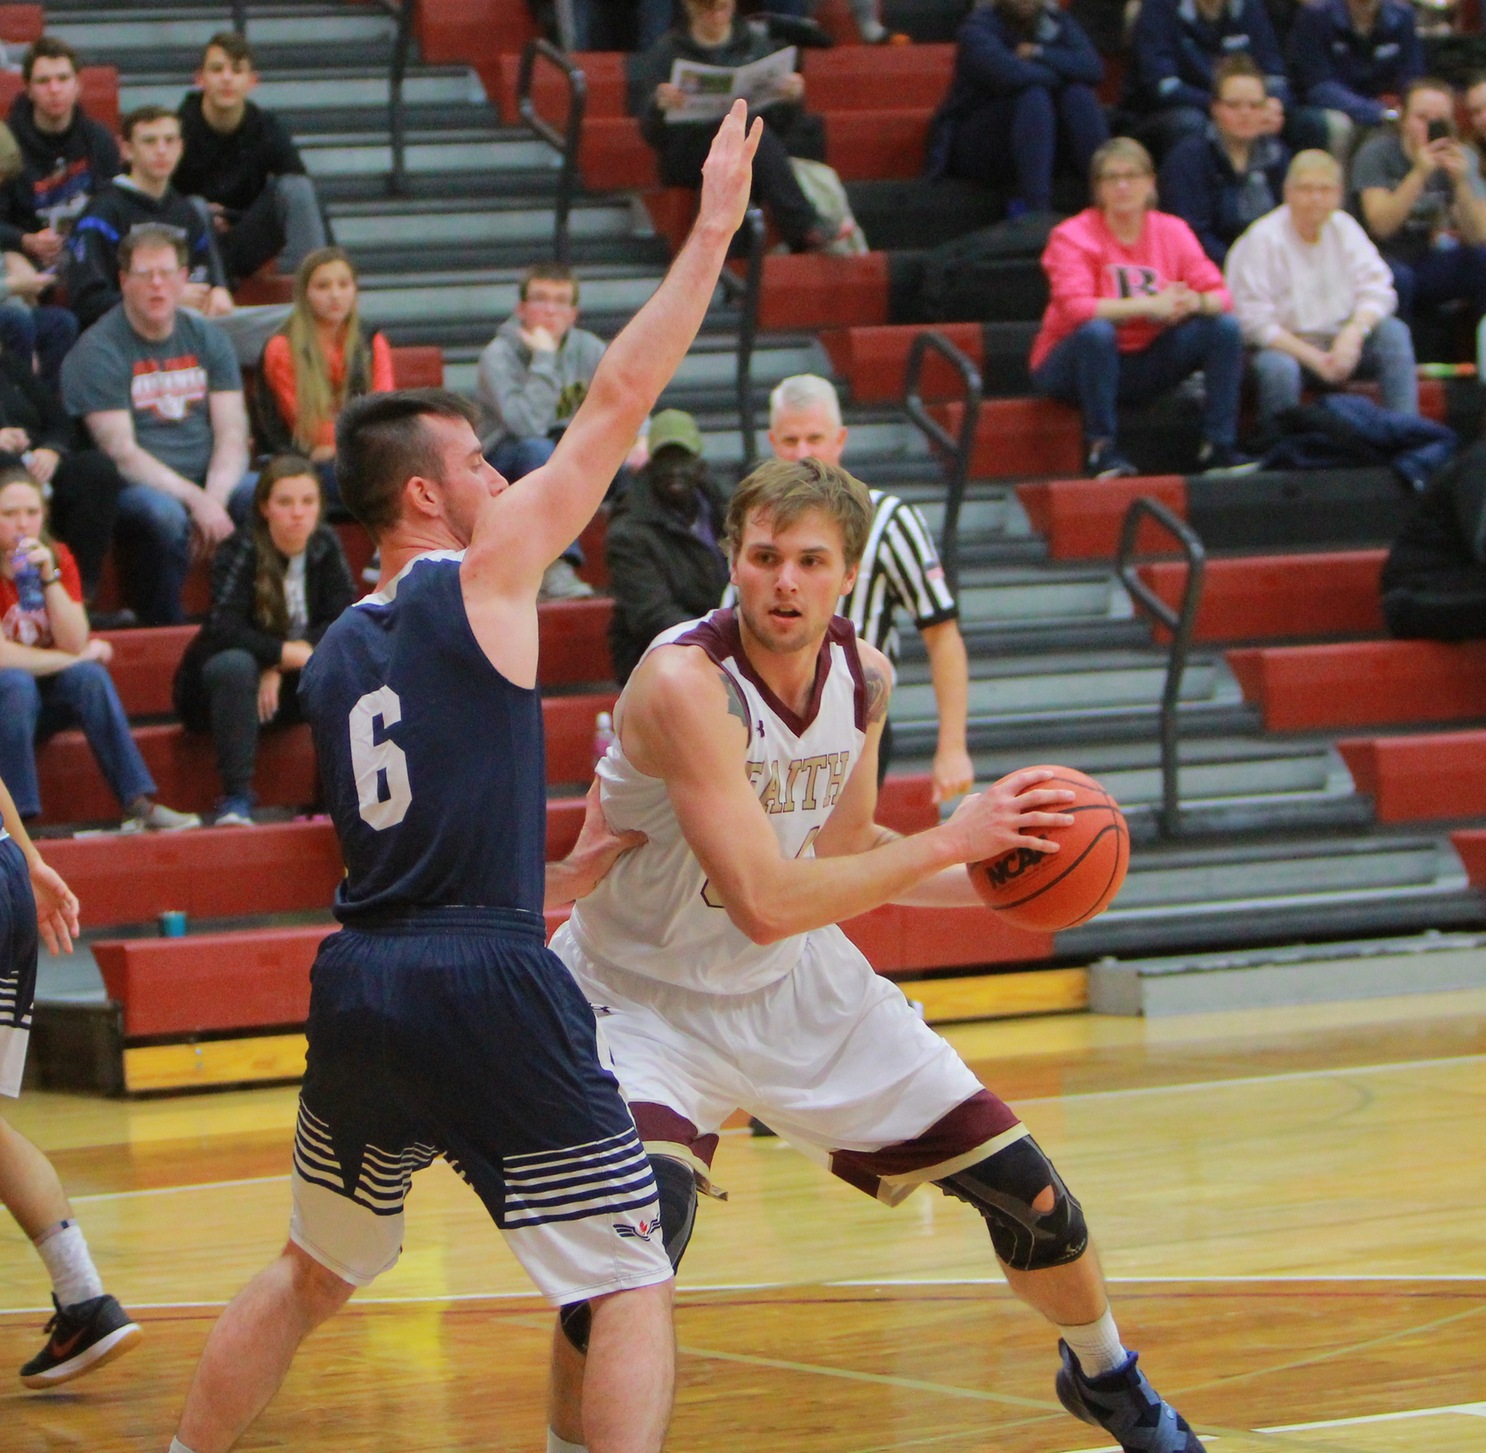 Tanner Van Beek led the Faith Eagles with 13 points in a loss to Randall University